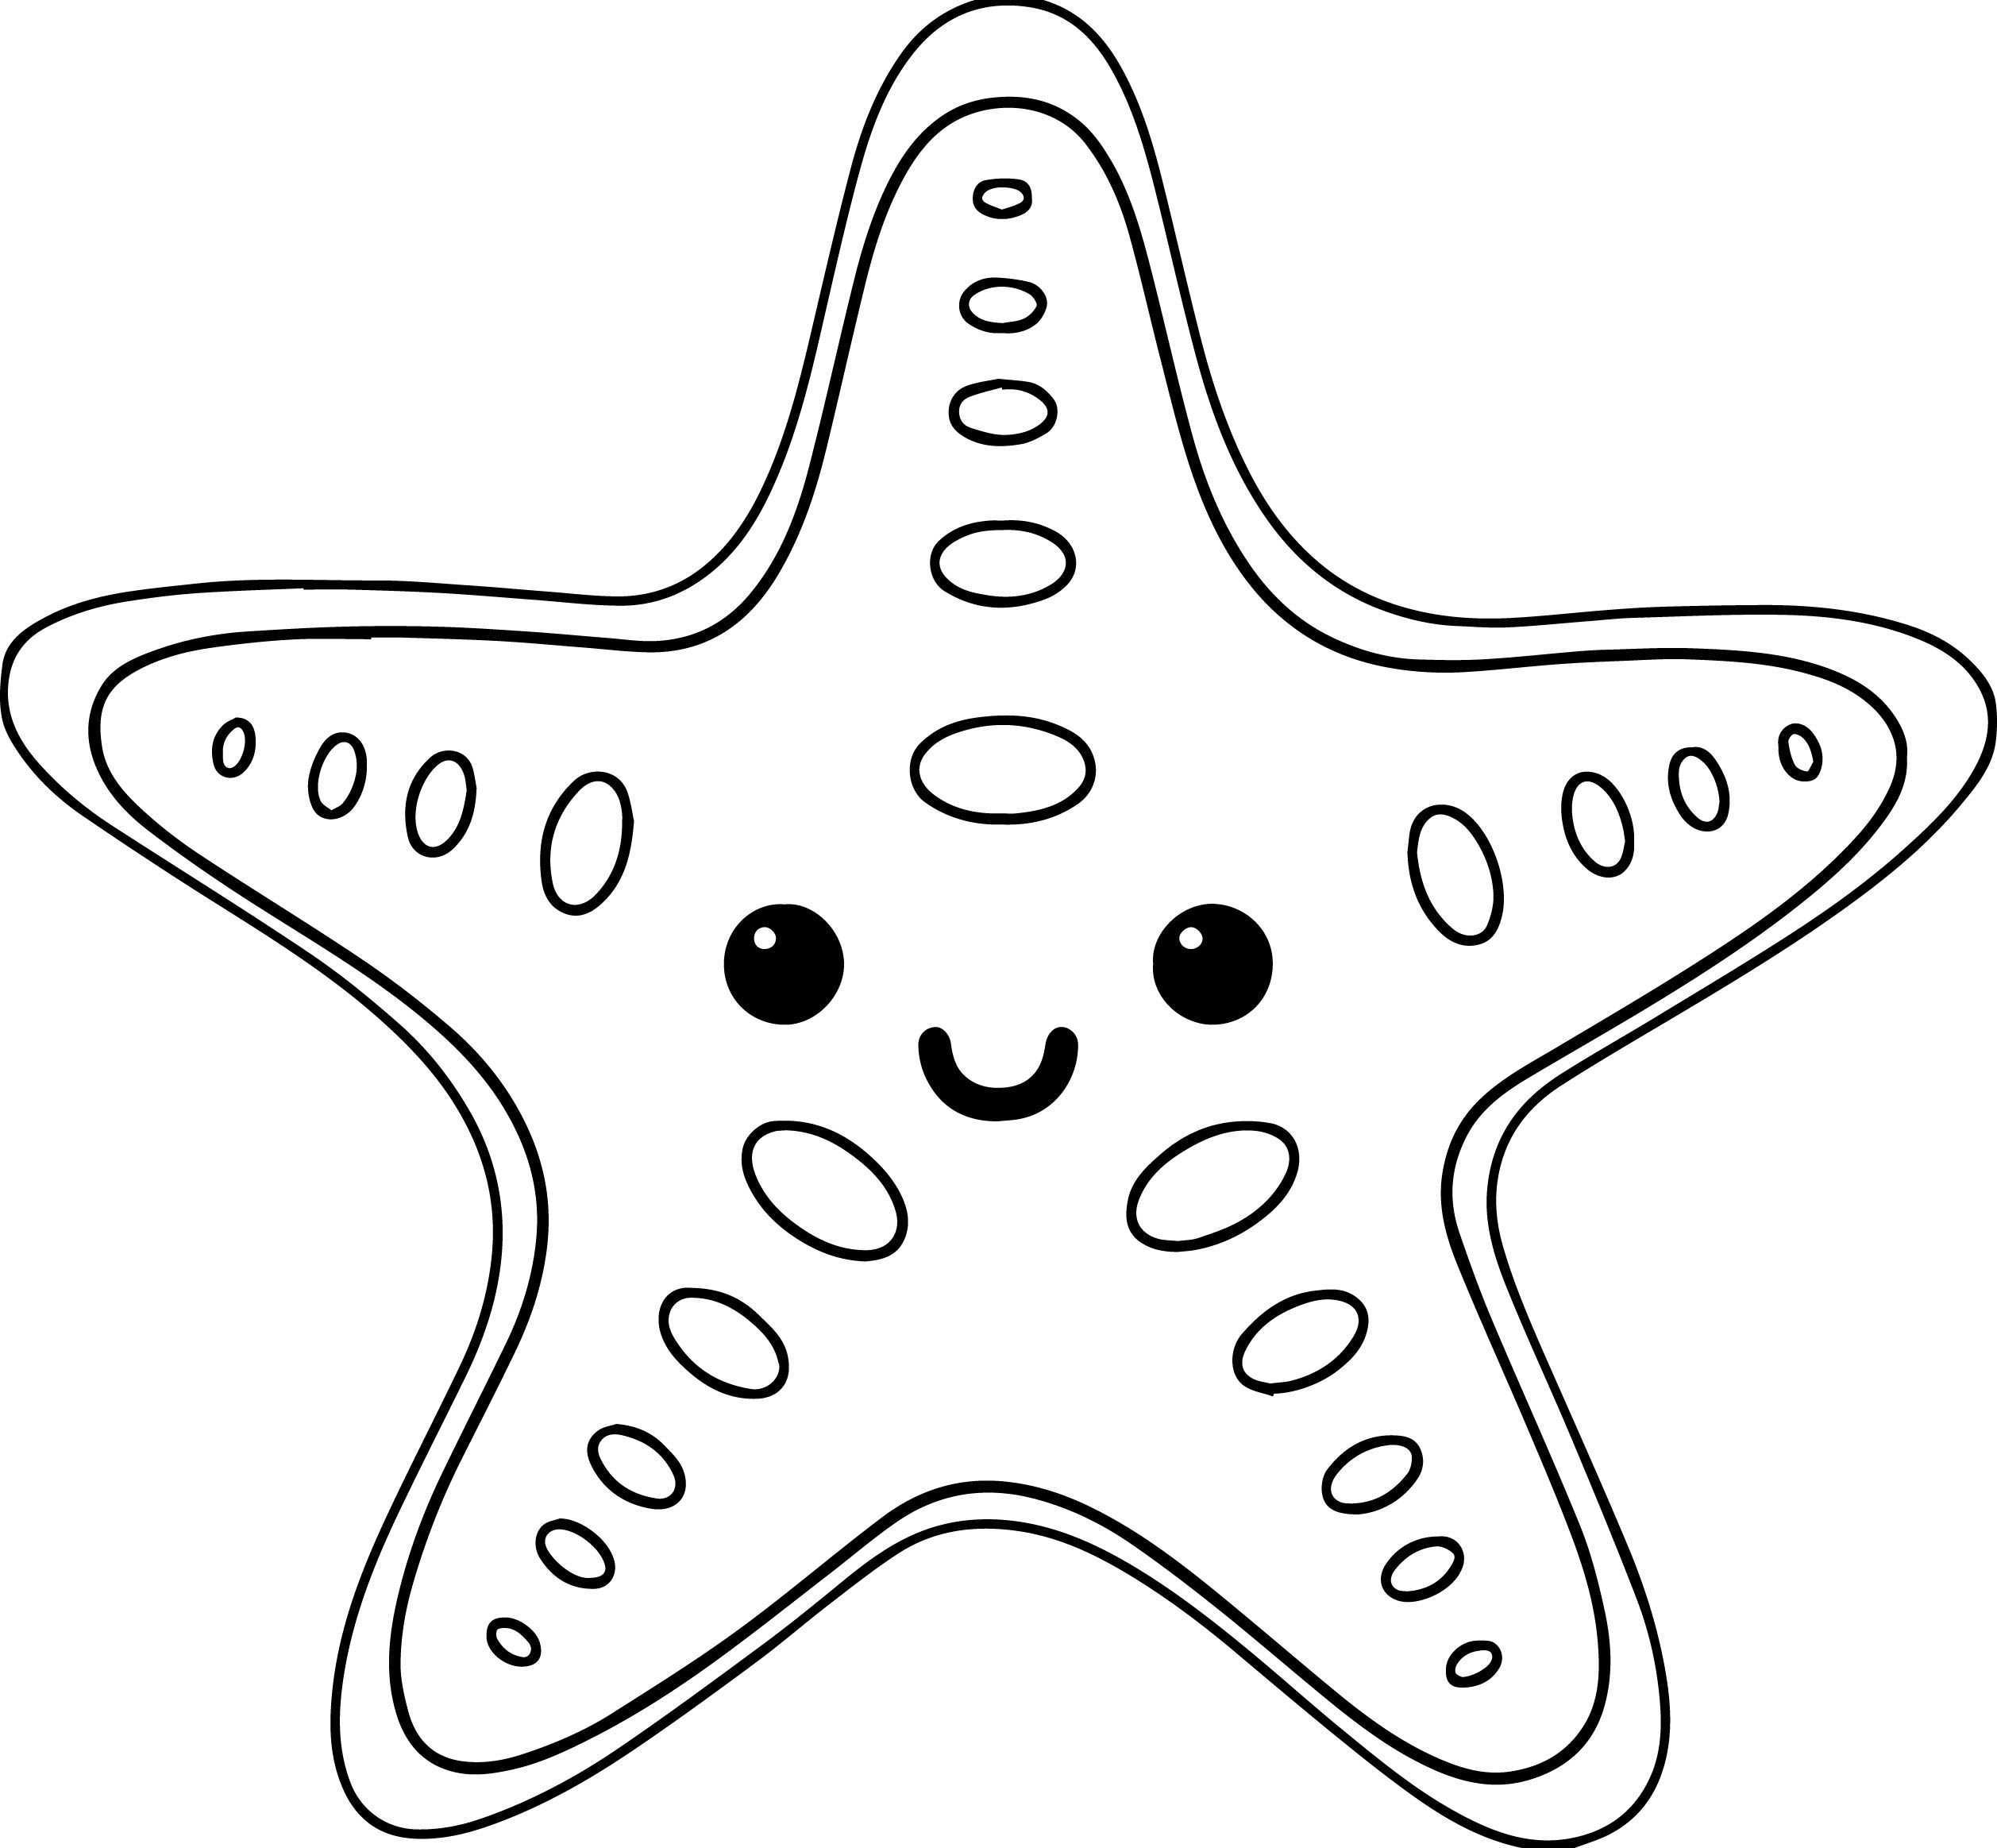 Cute Starfish Coloring Pages Free Zeester Kleurplaten Thema